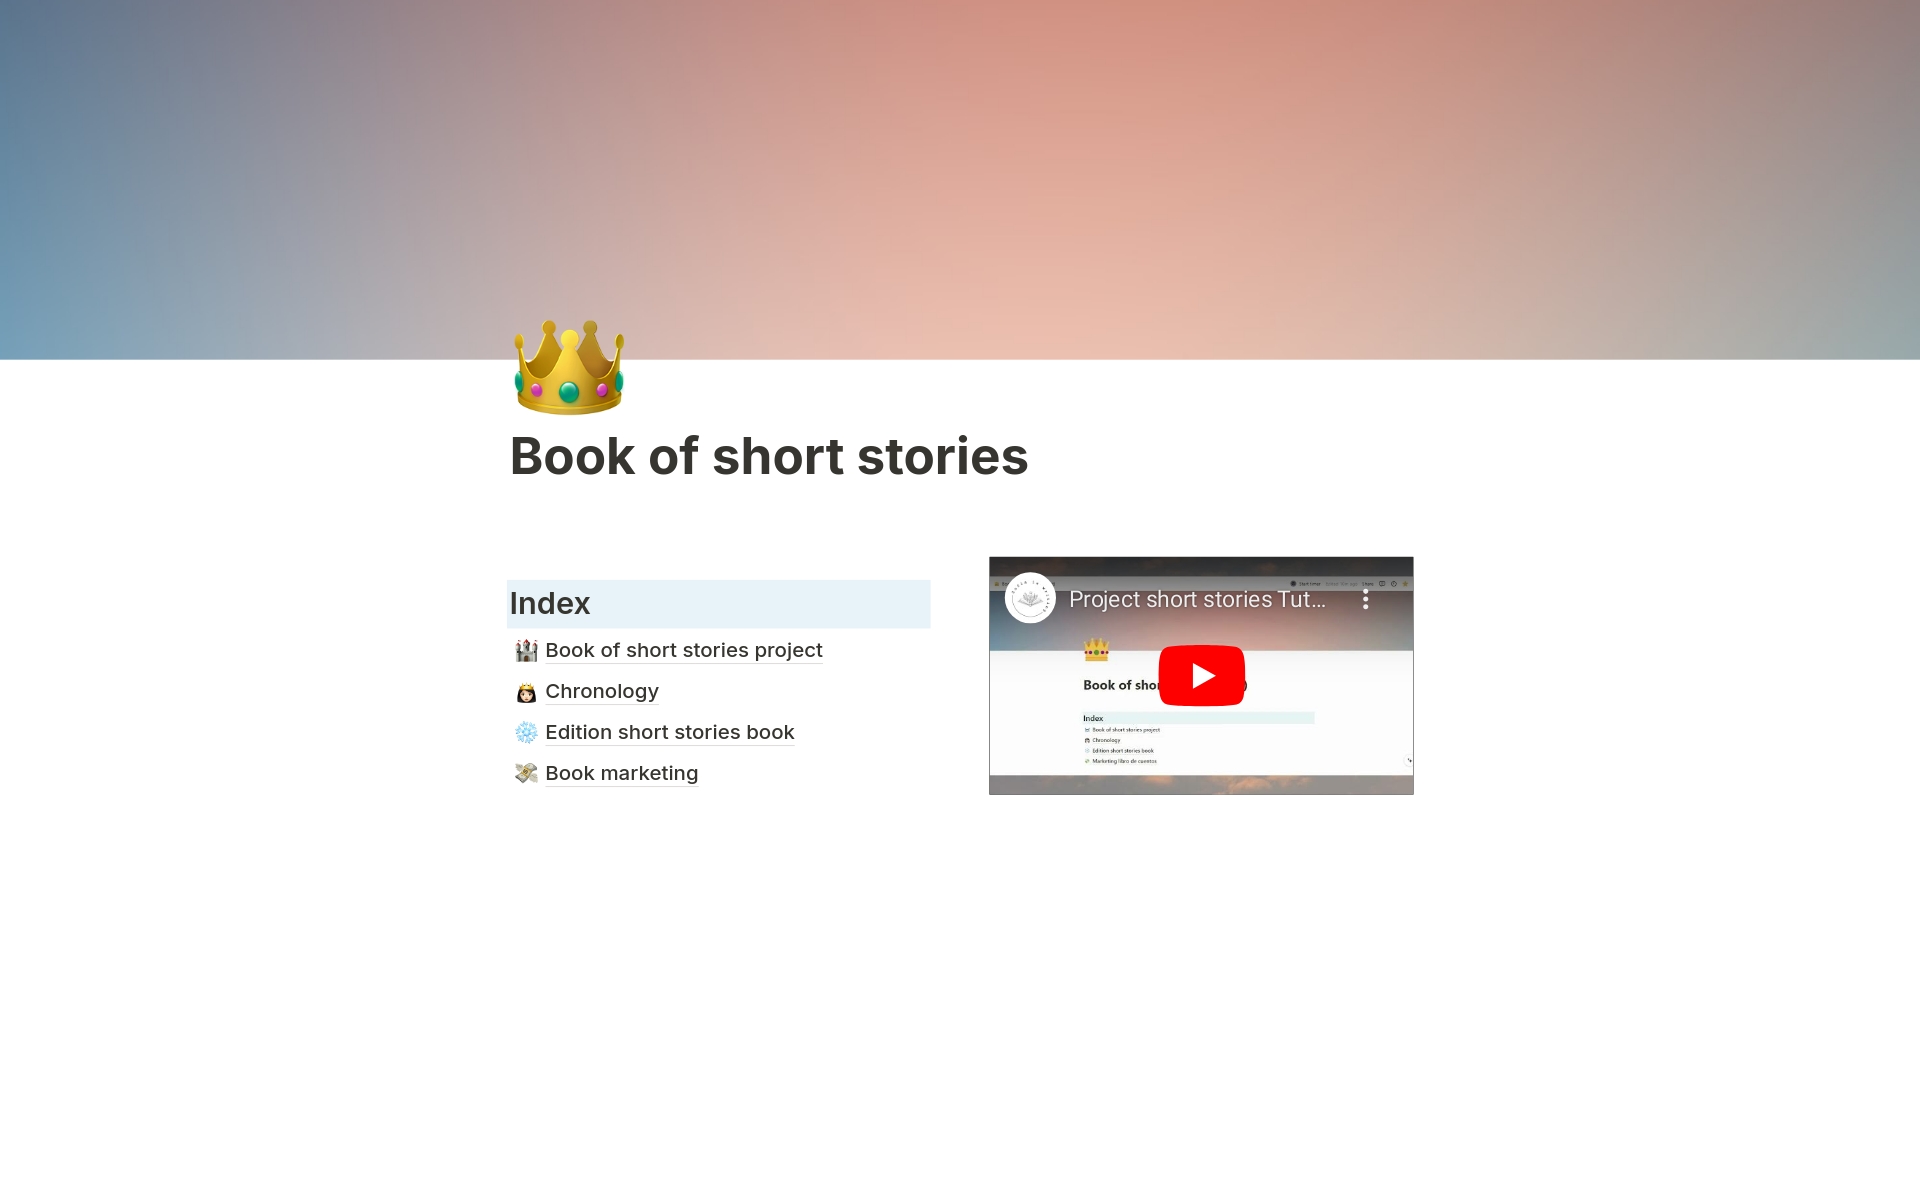 This template is designed to help you plan, organize, and track every detail of your short story book project.
You will independently plan each story, organize them chronologically, and track every step of the editing process.